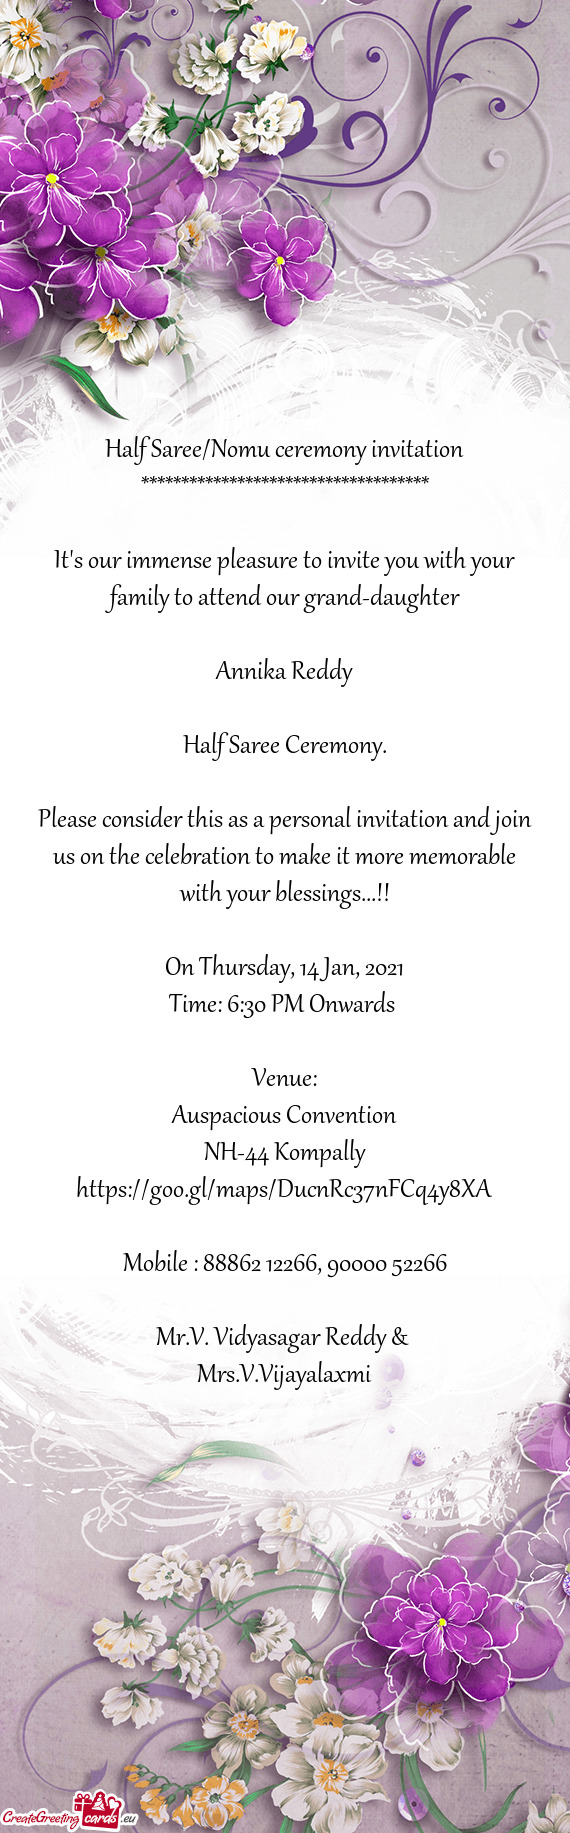 It's our immense pleasure to invite you with your family to attend our grand-daughter